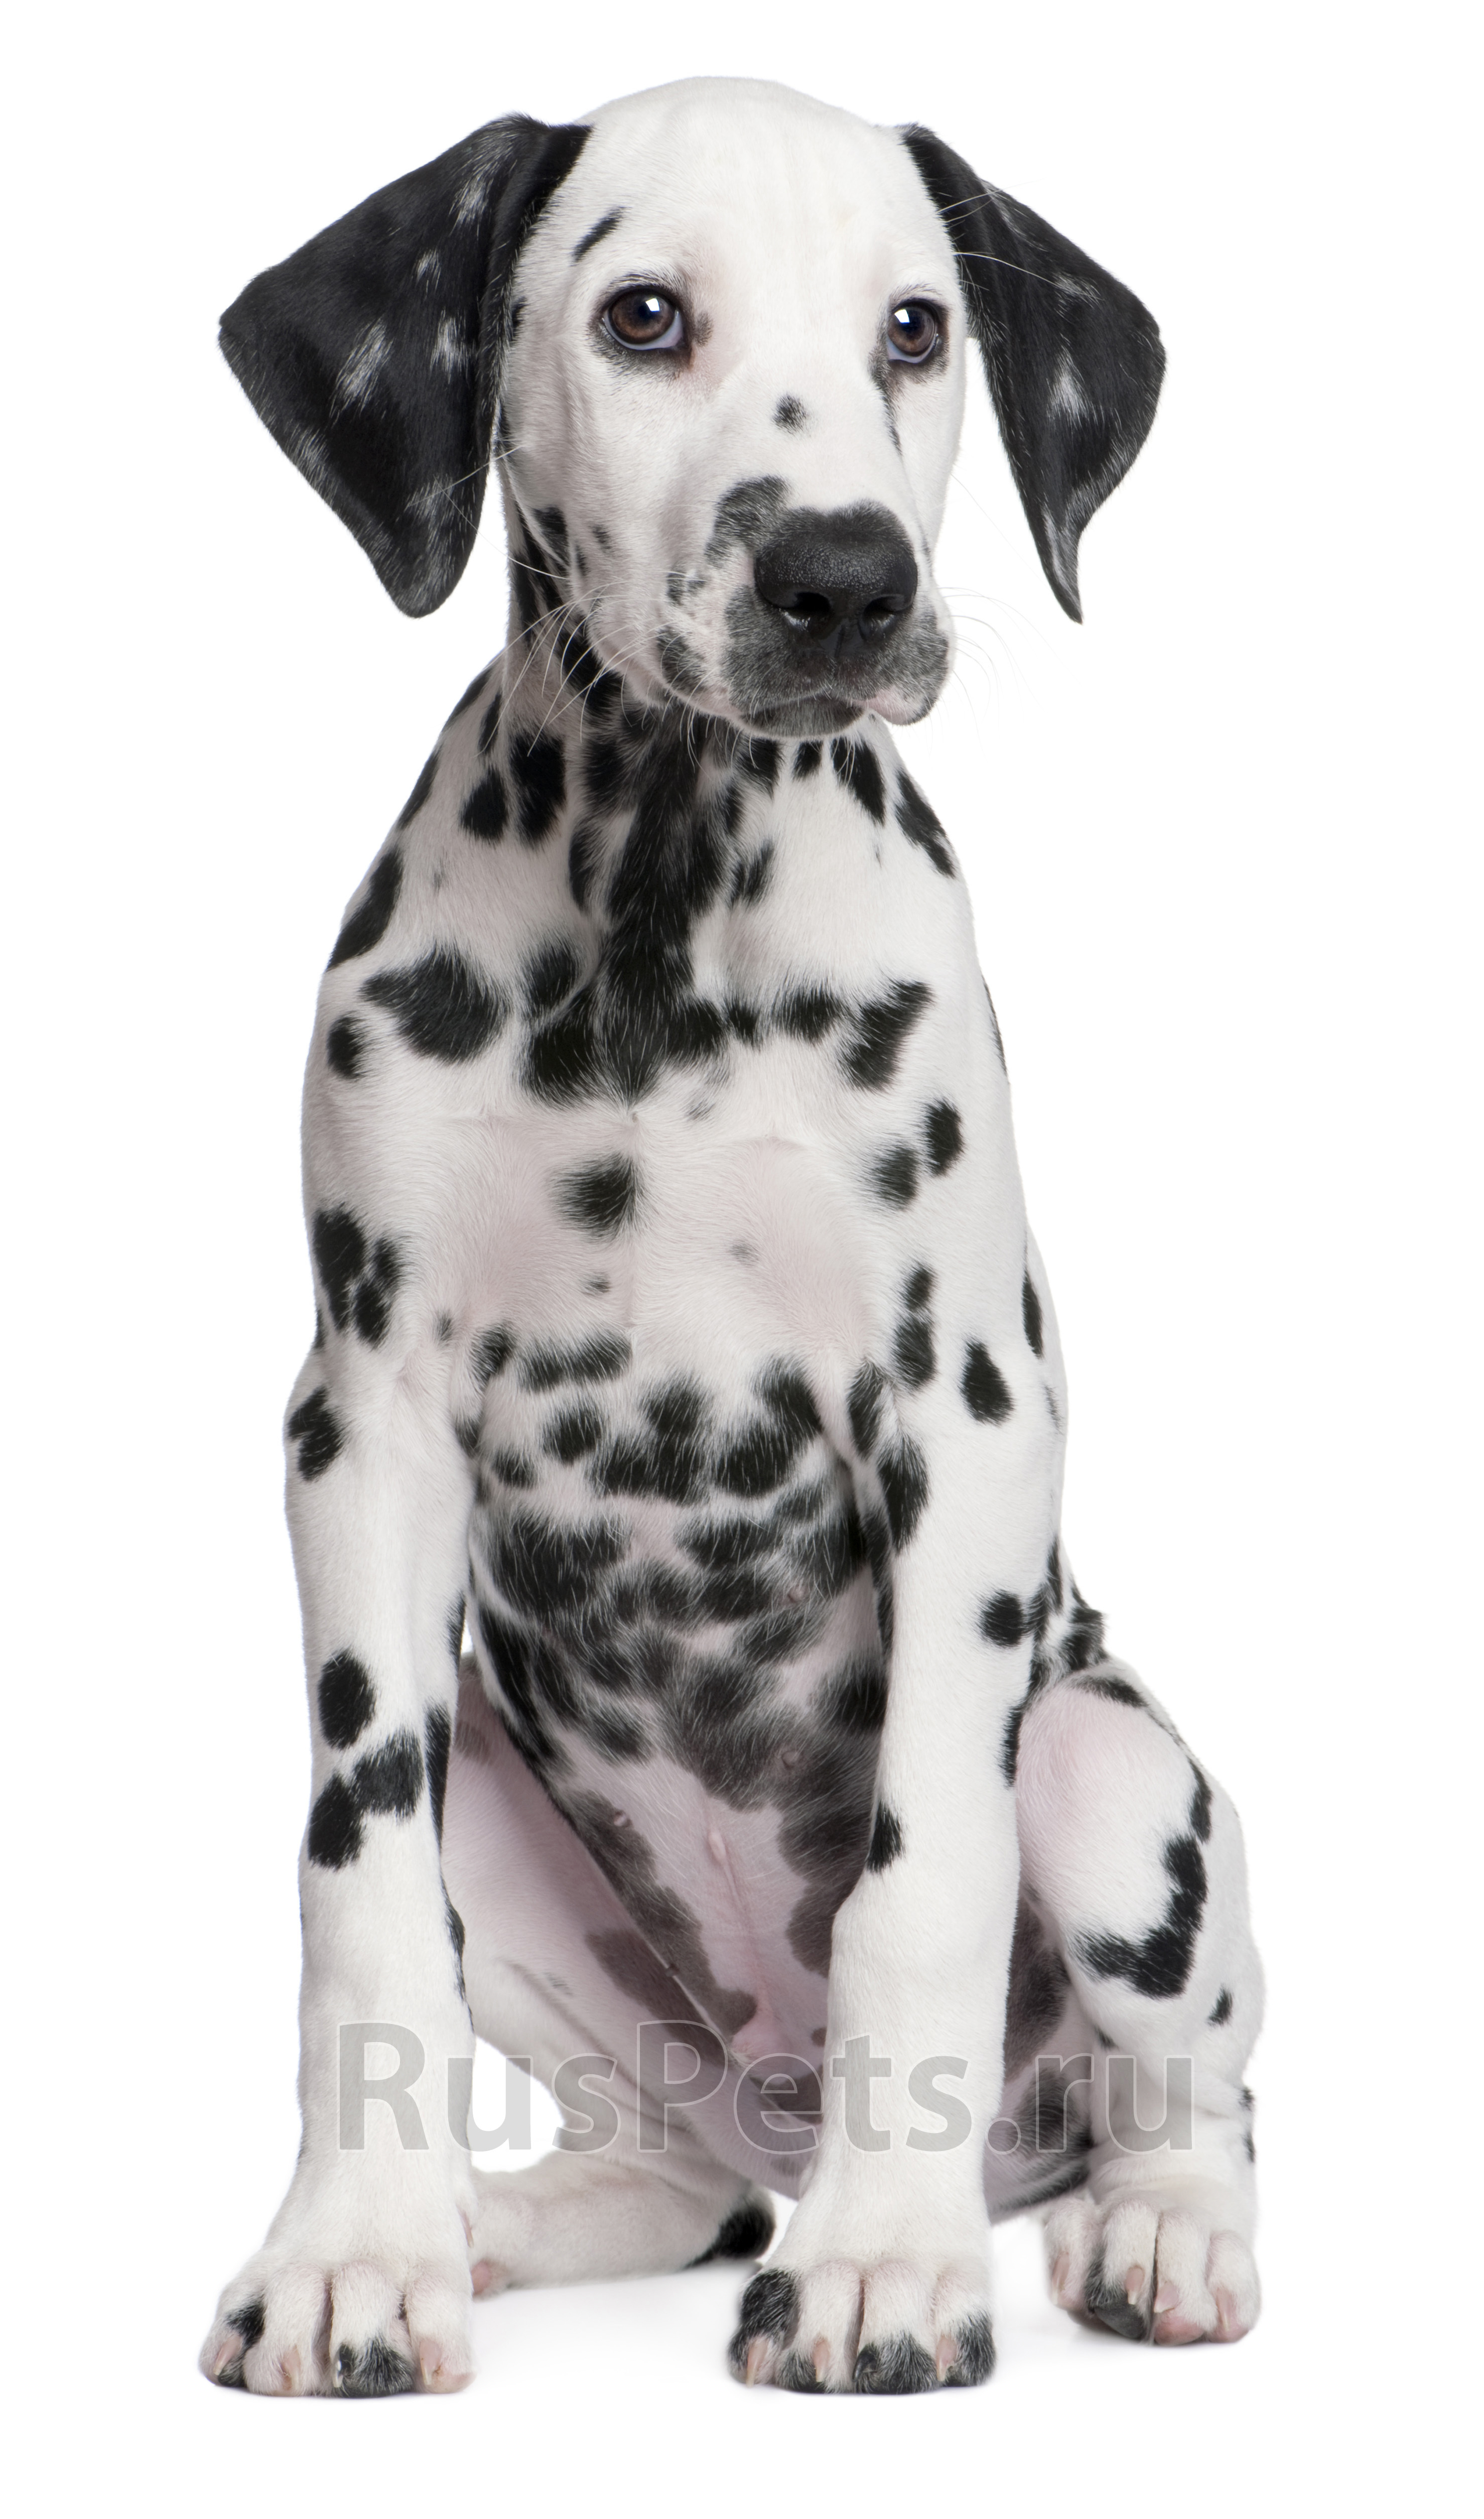 Dalmatian Sitting On The Floor Wallpaper And Image